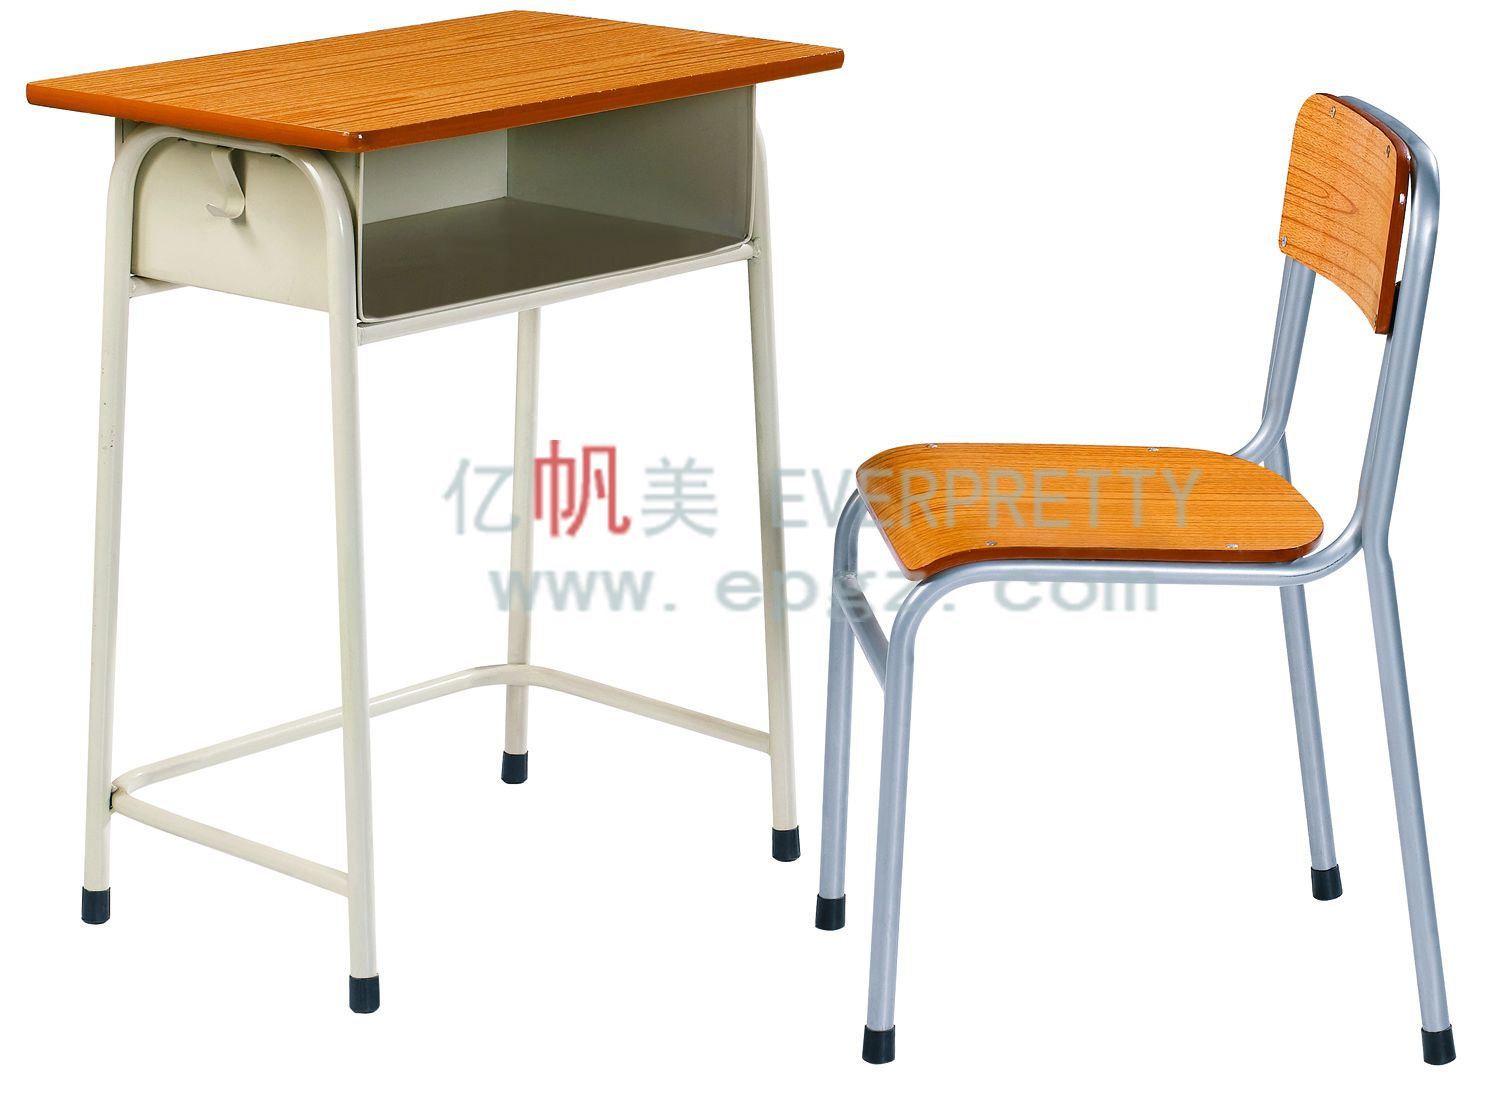 School Furniture, School Tables and Chairs Wood, Student Desks and Chairs